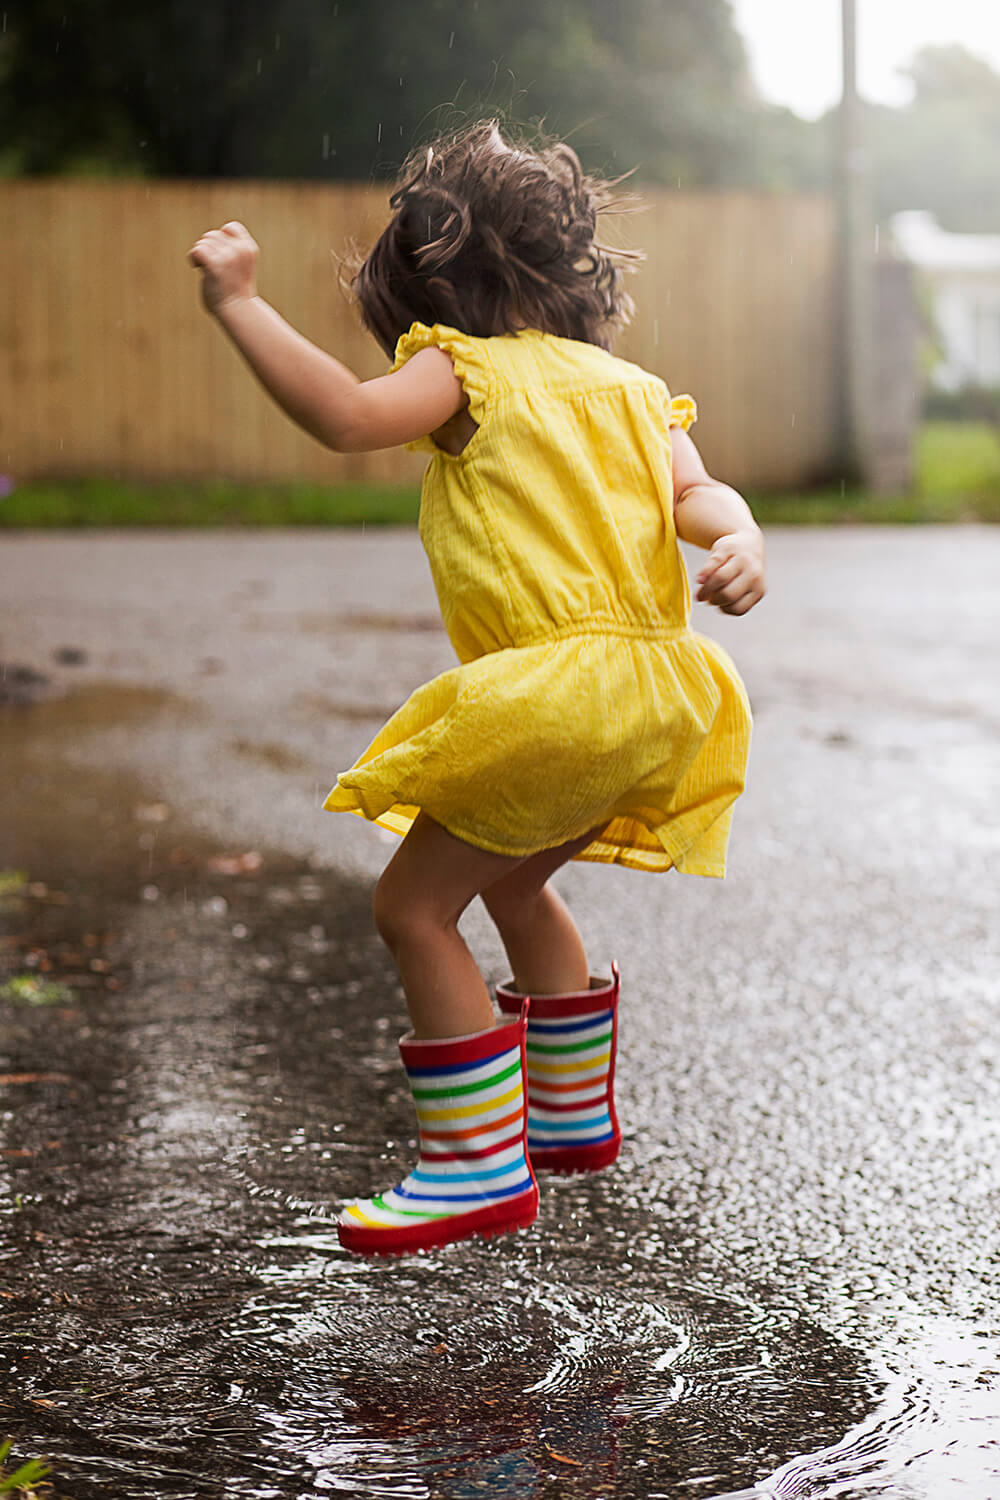 Image of a girl jumping in a rain puddle